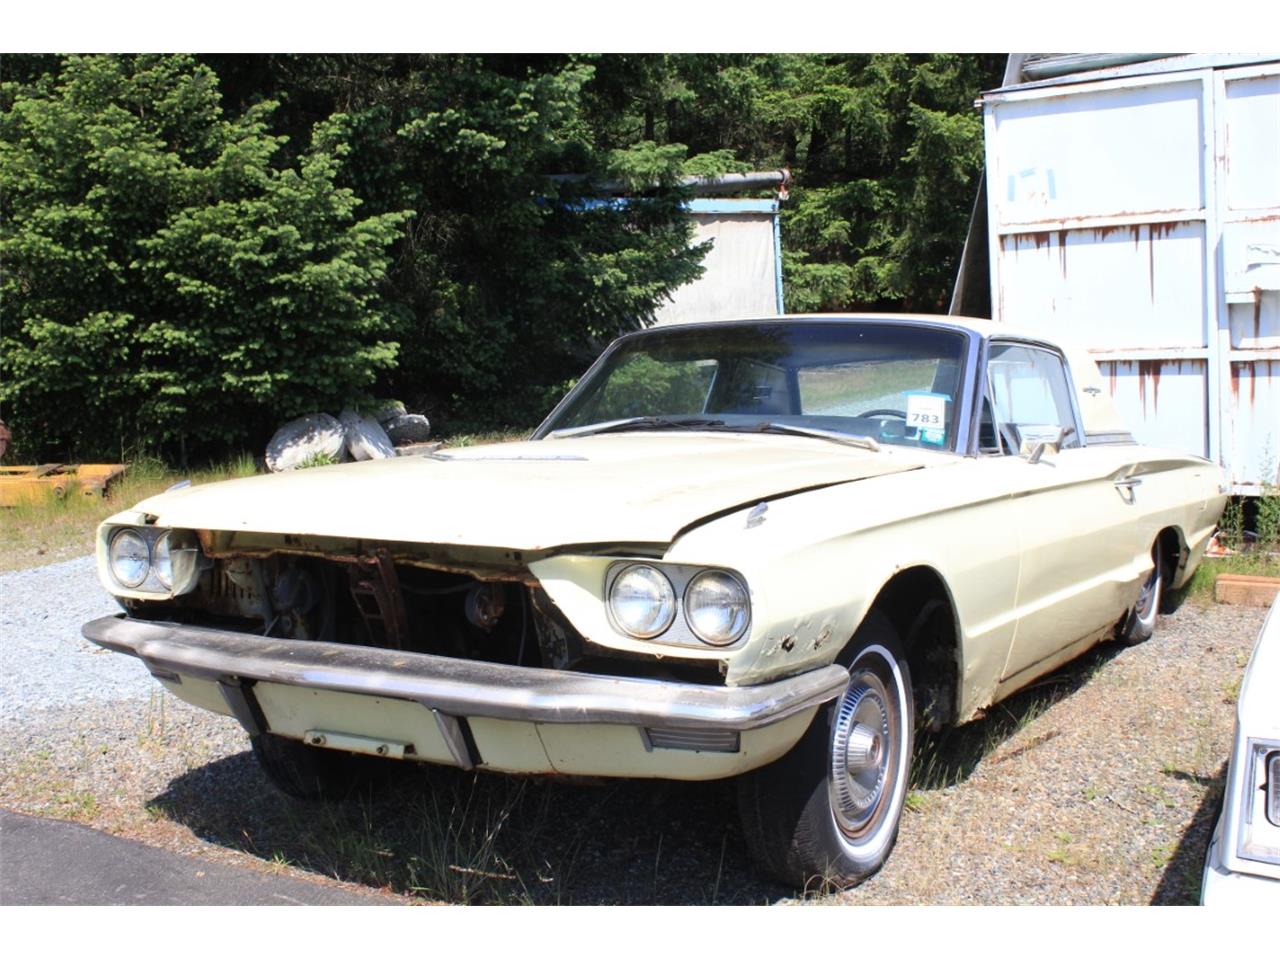 For Sale at Auction: 1965 Ford Thunderbird for sale in Tacoma, WA